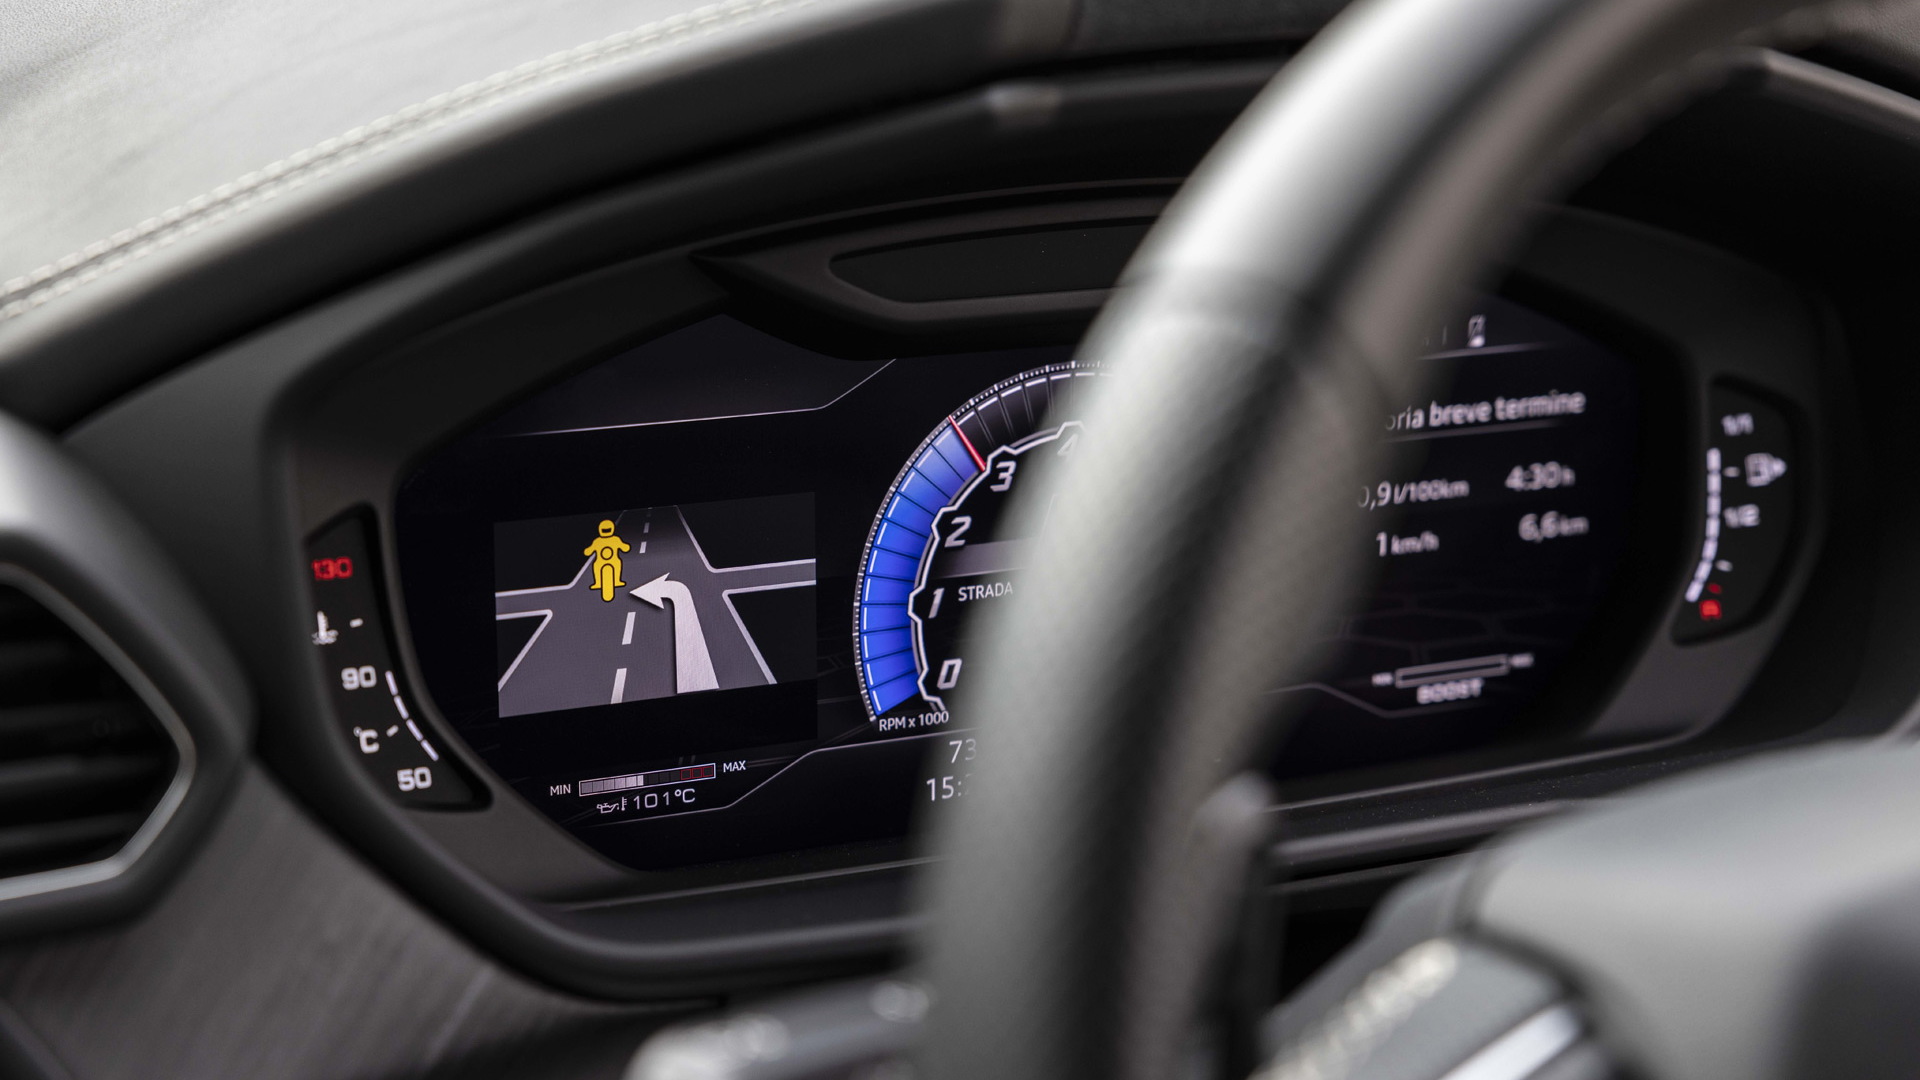 Lamborghini and Ducati test car-to-motorcycle communication system